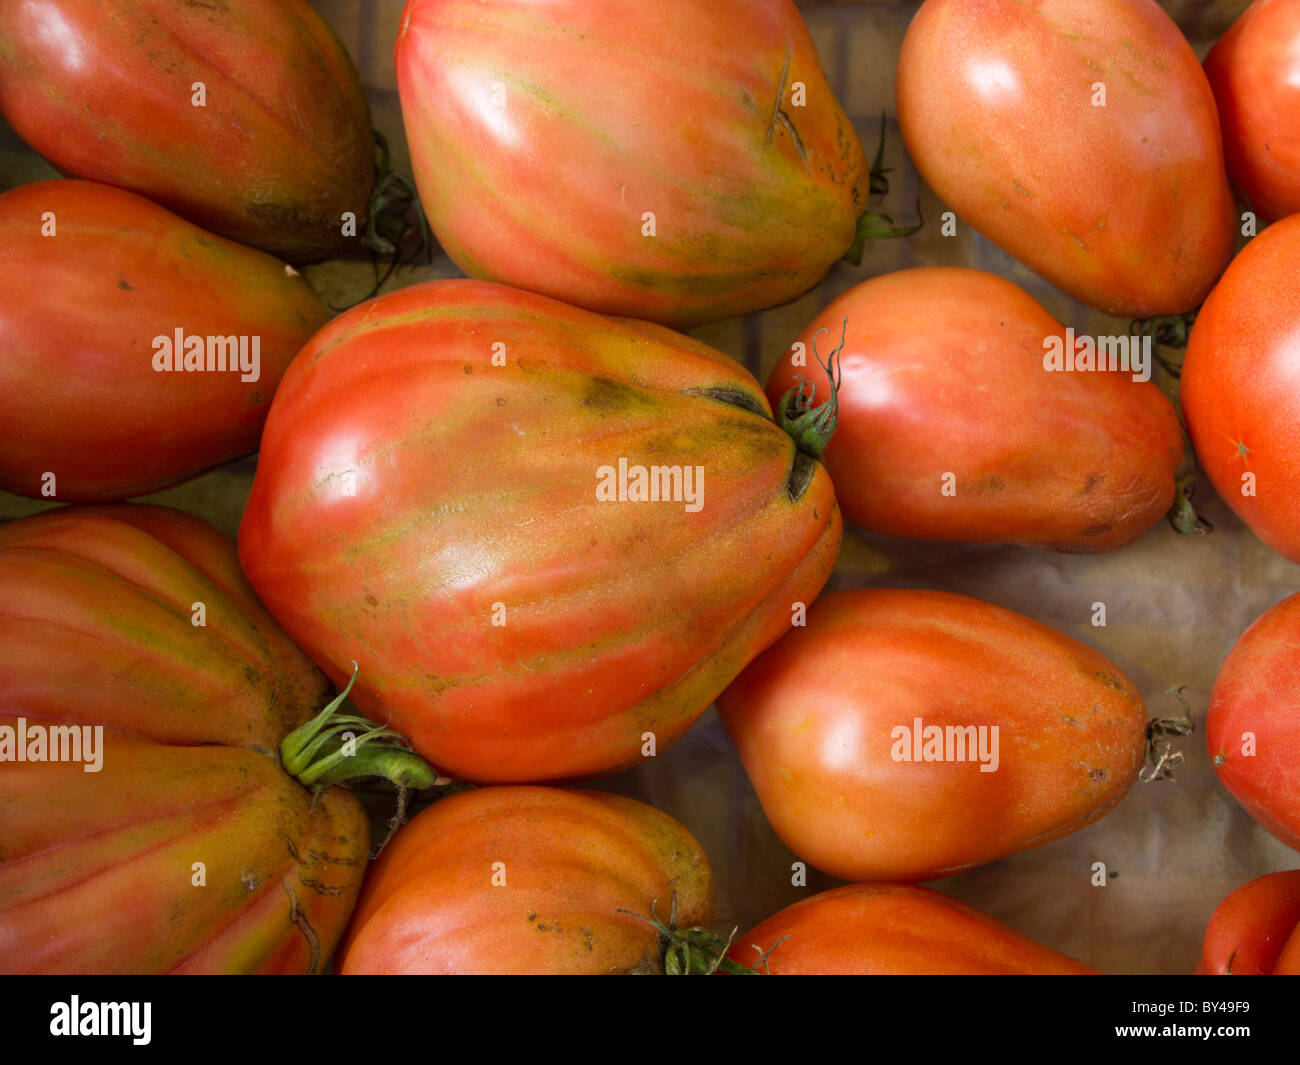 Oxheart tomatoes in the market, Cuneo, Italy Stock Photo